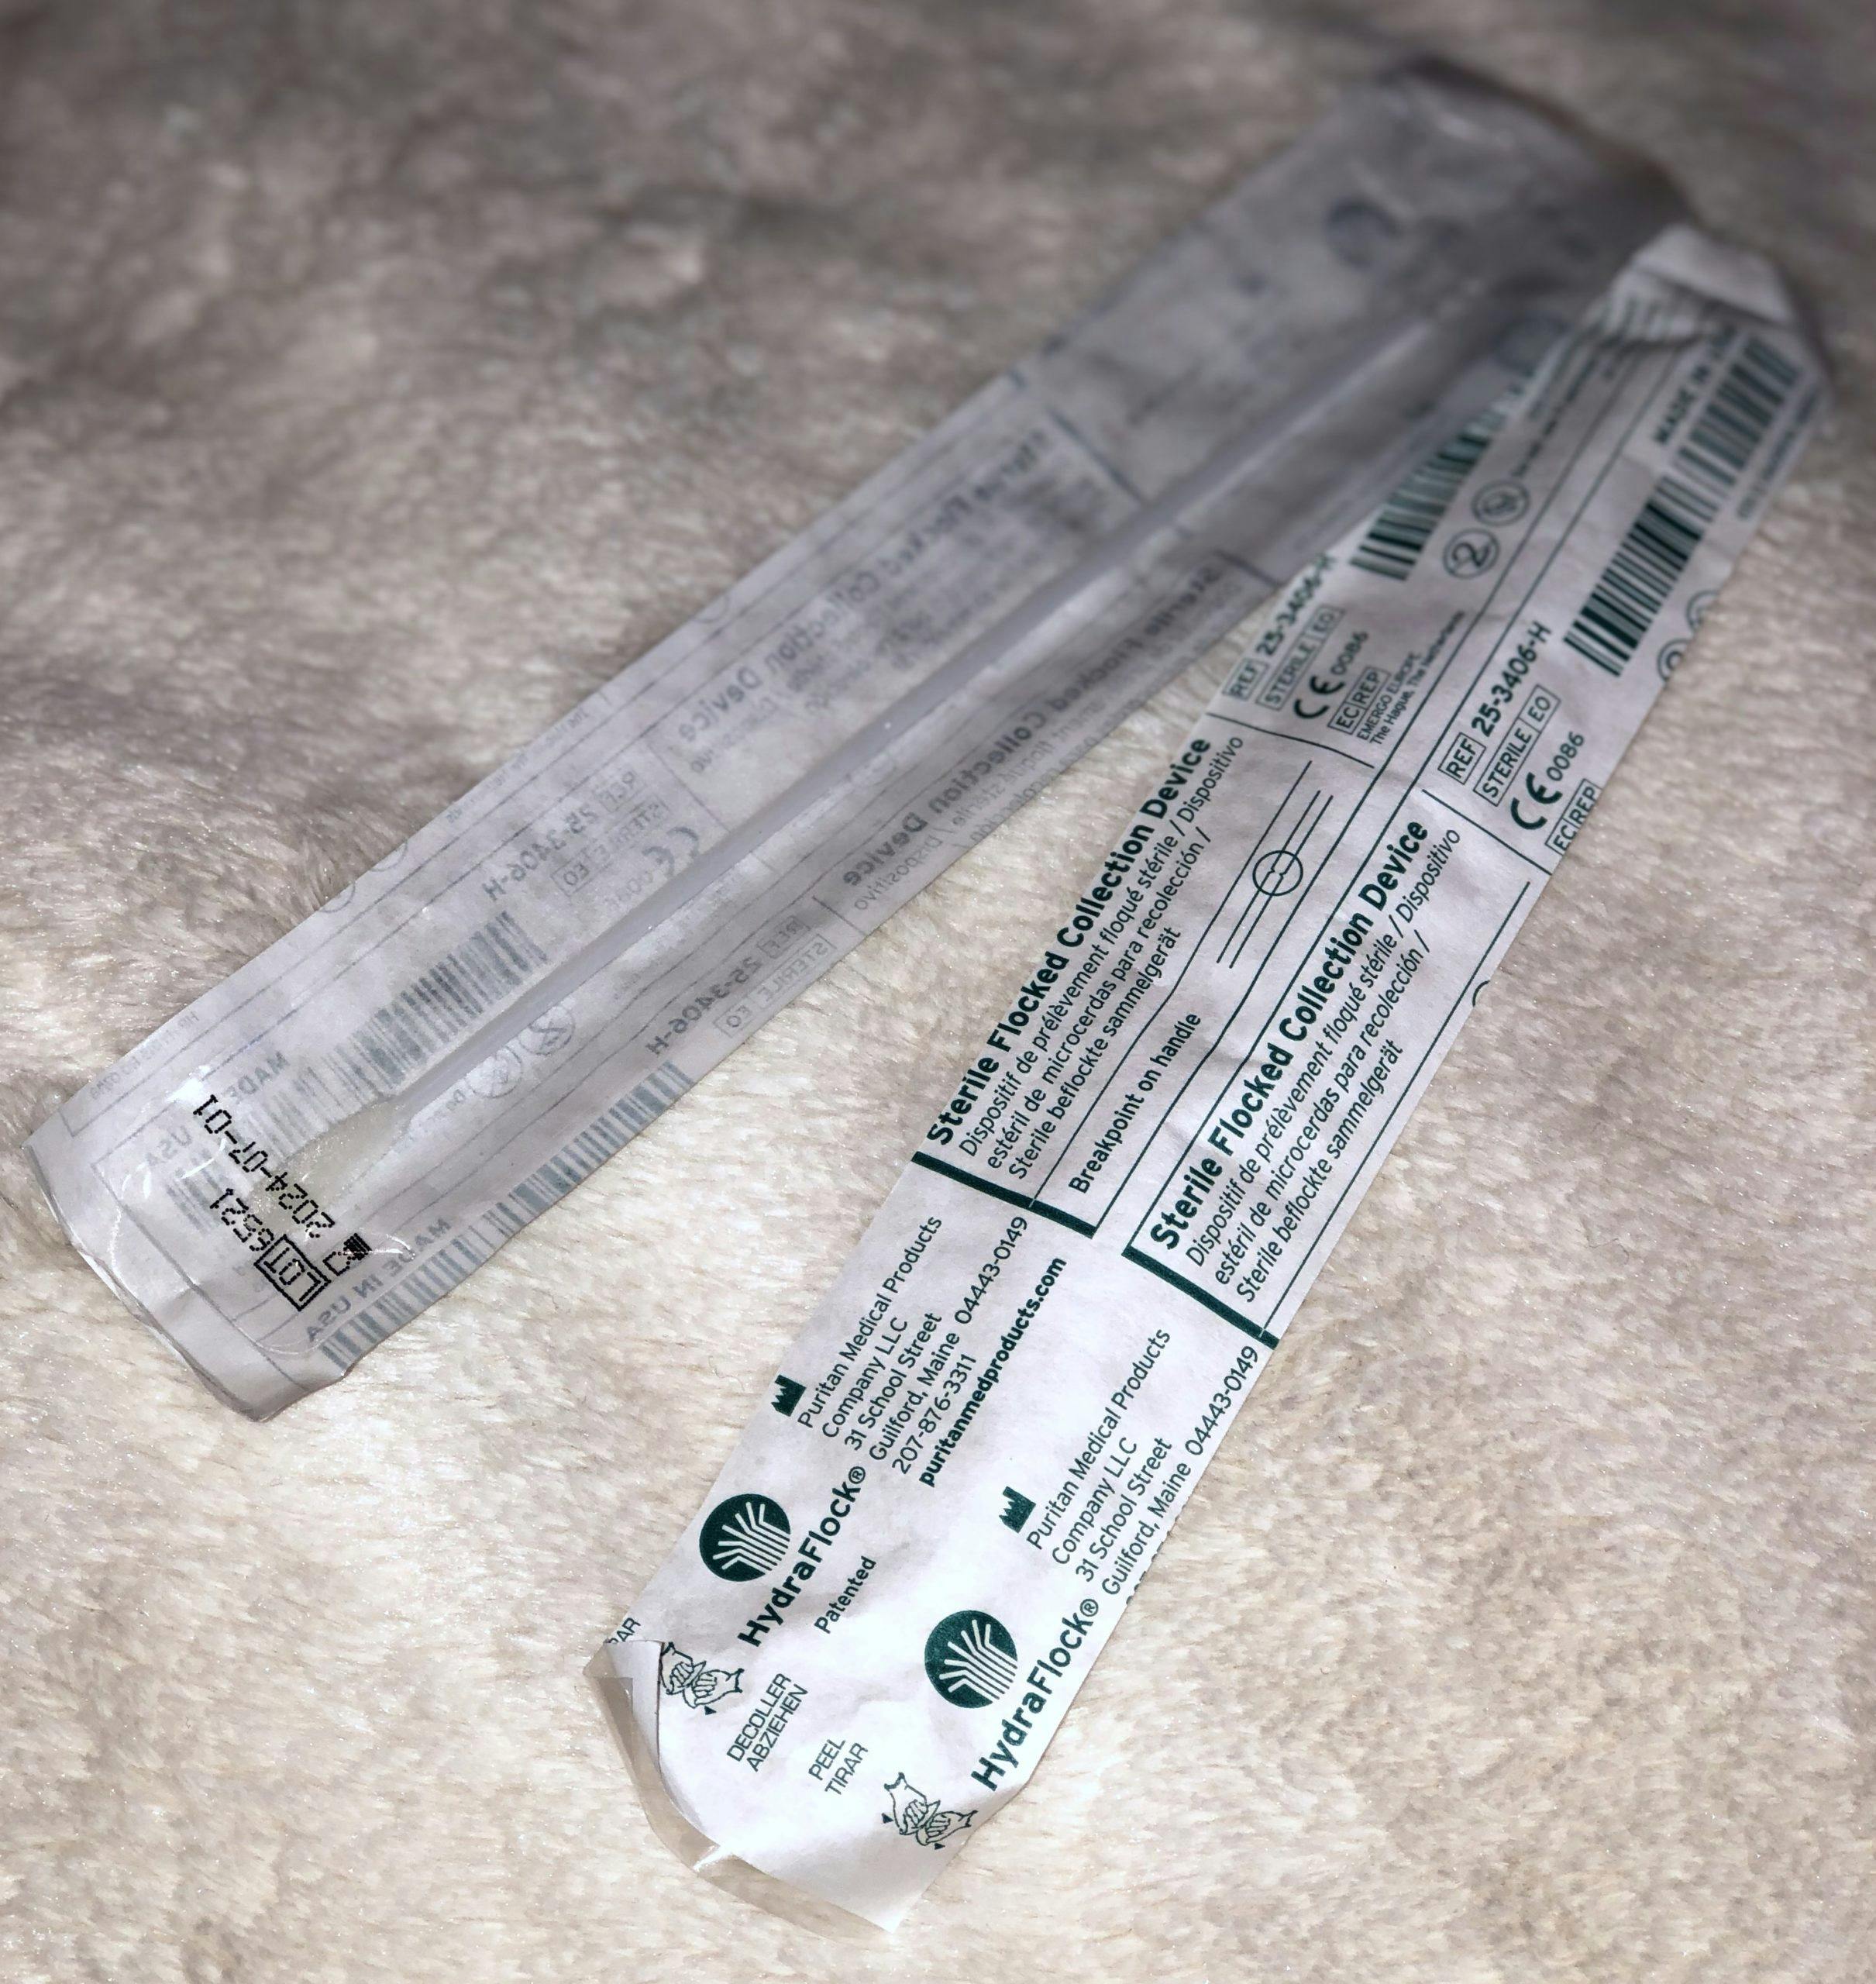 Sterile collection swabs included with Dynamic DNA Labs' cannabis DNA test.